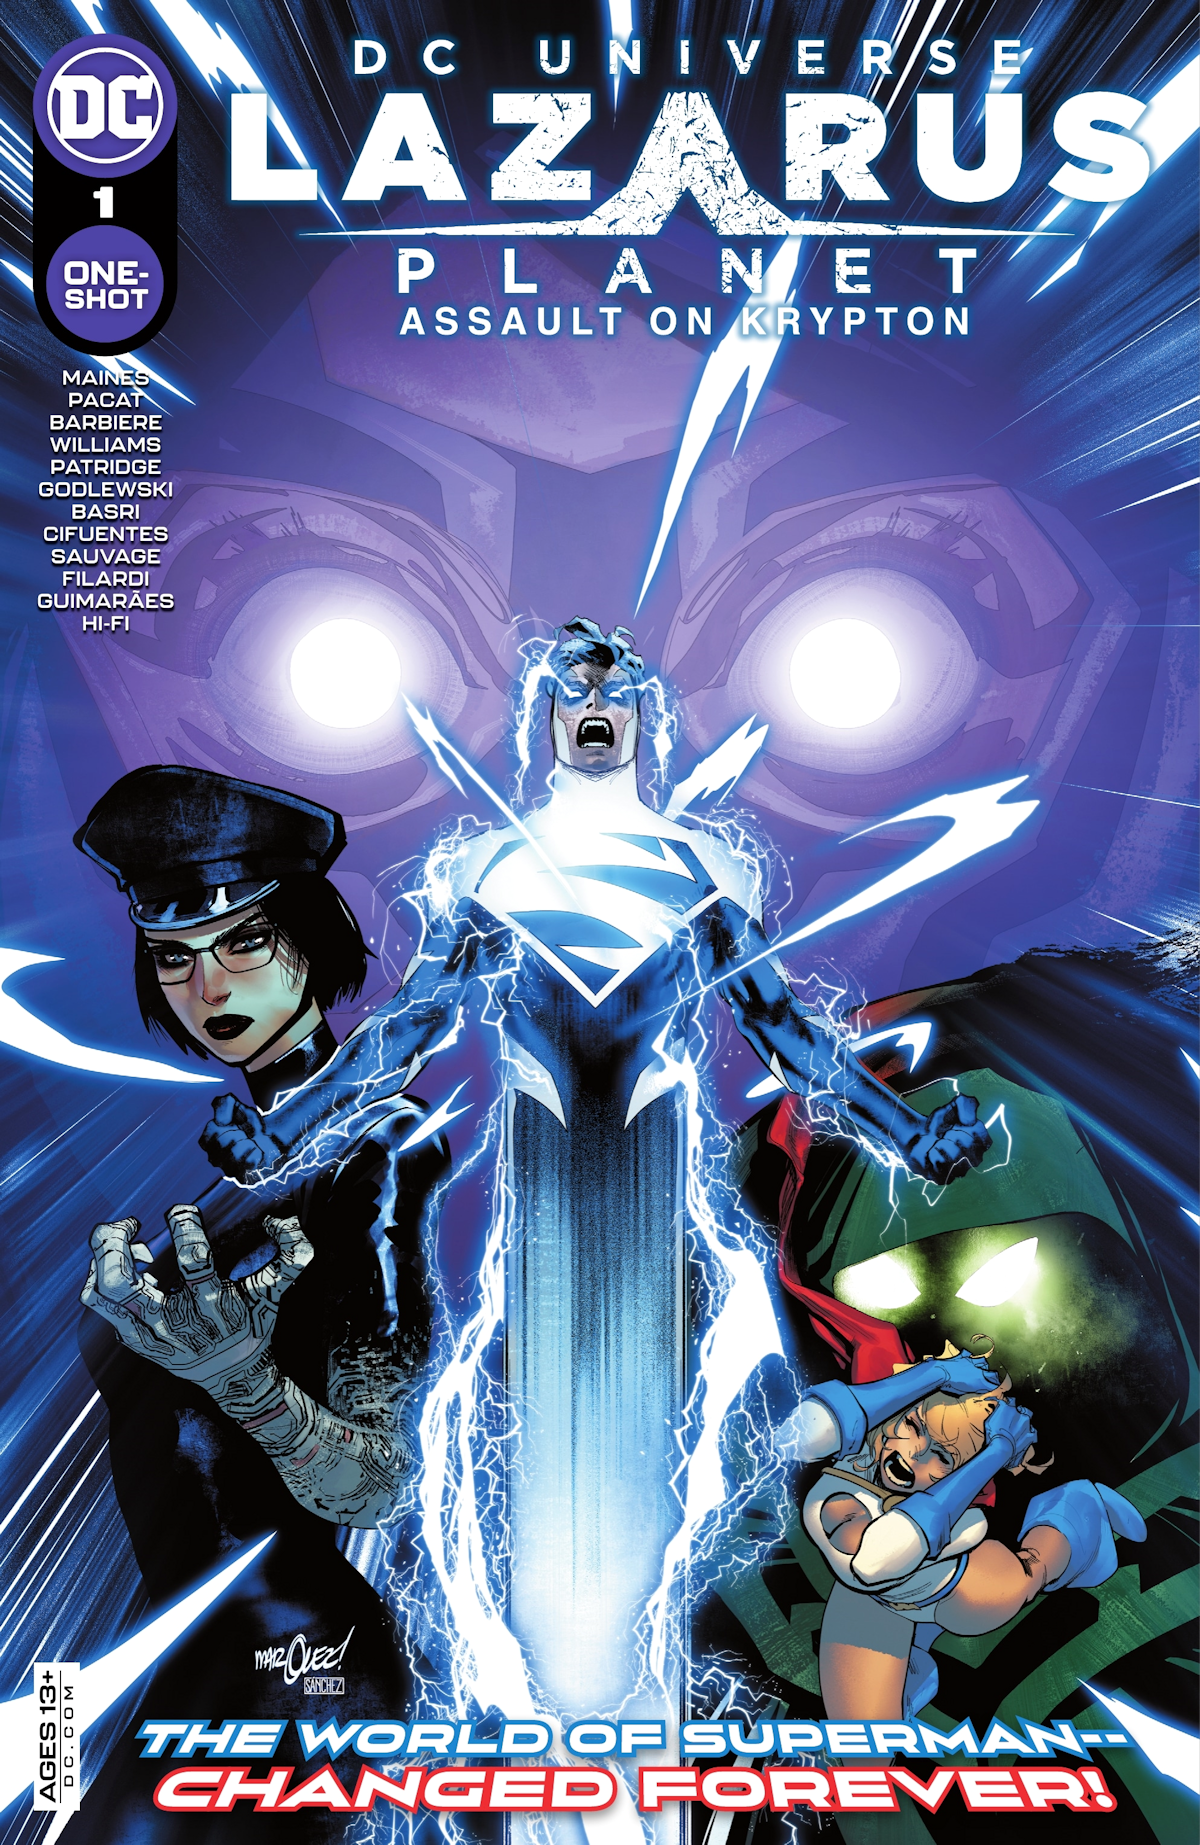 Lazarus Planet: Assault on Krypton 1 (Cover A)